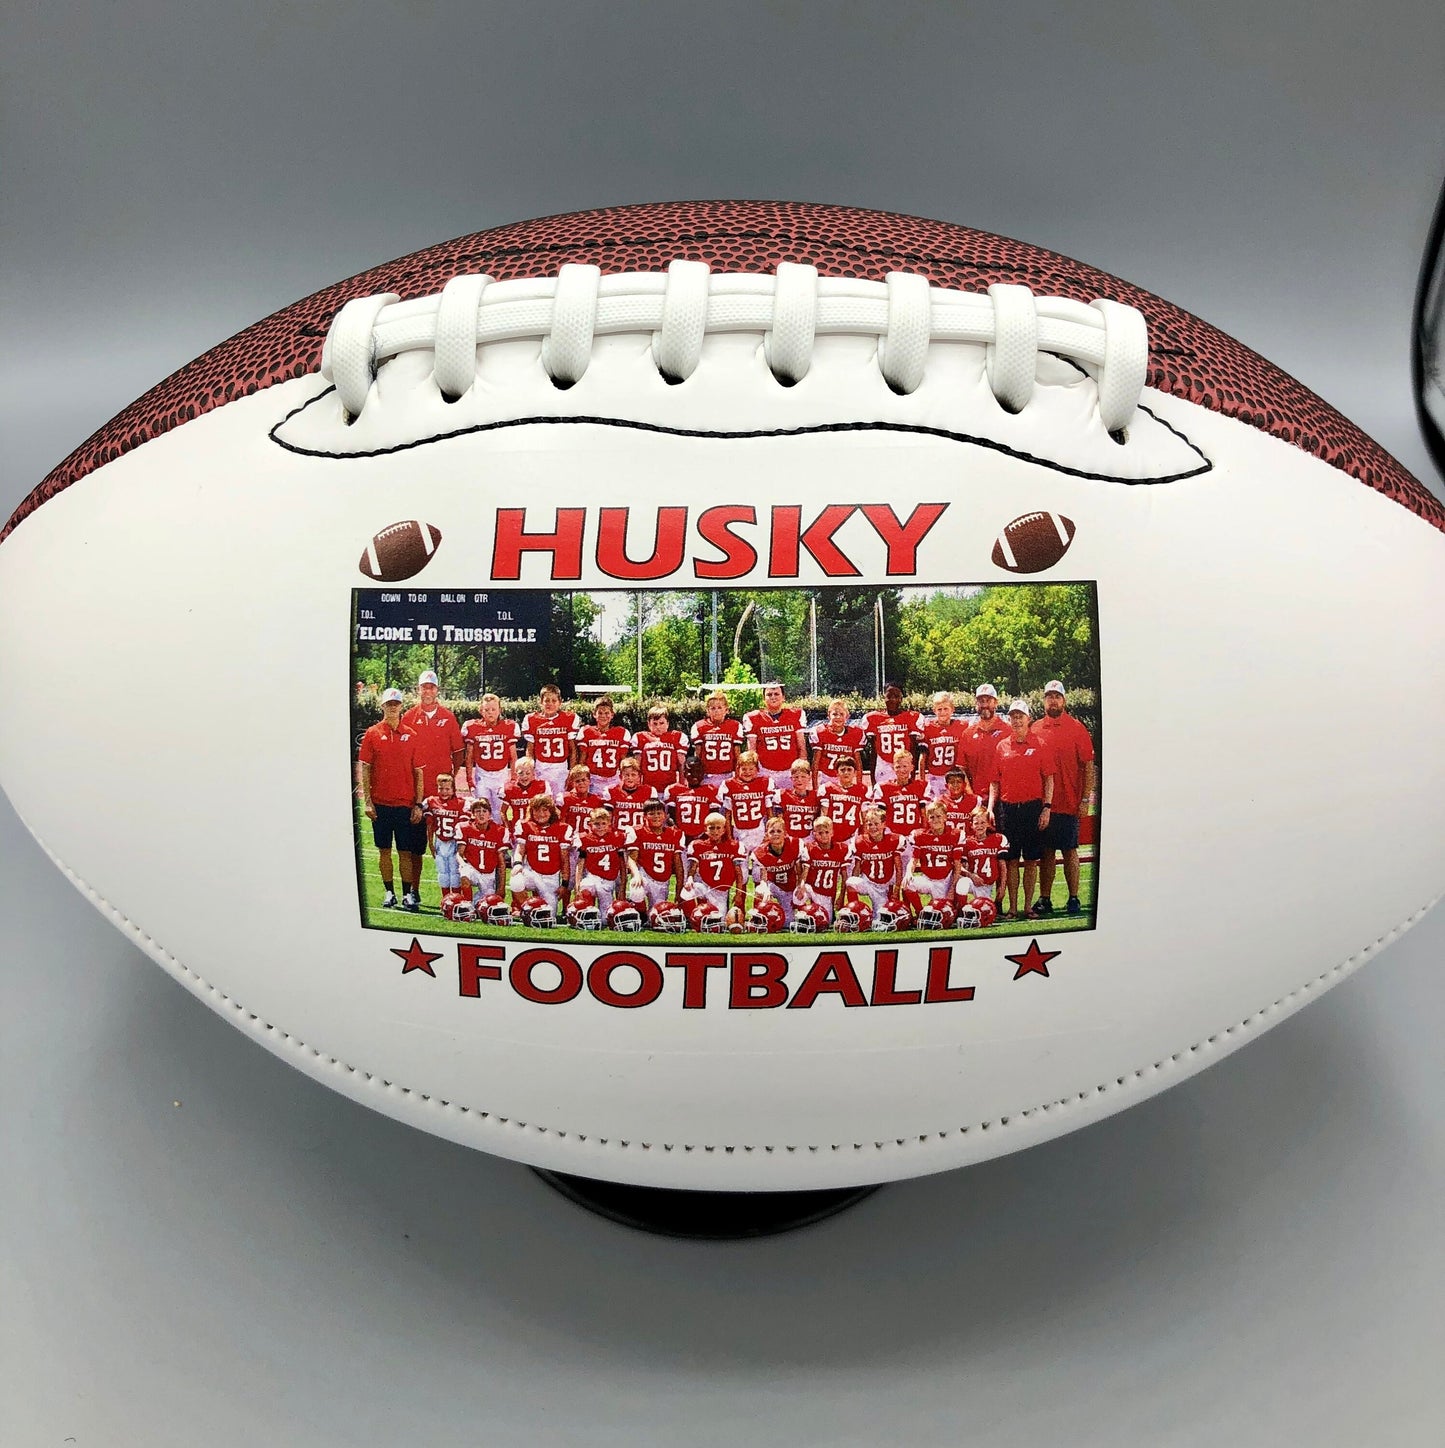 Personalized Double Panel Mid Size Footballs for Football Coach's Gift, Senior Gifts, Football Gift, Team Awards, Sponsors, Weddings